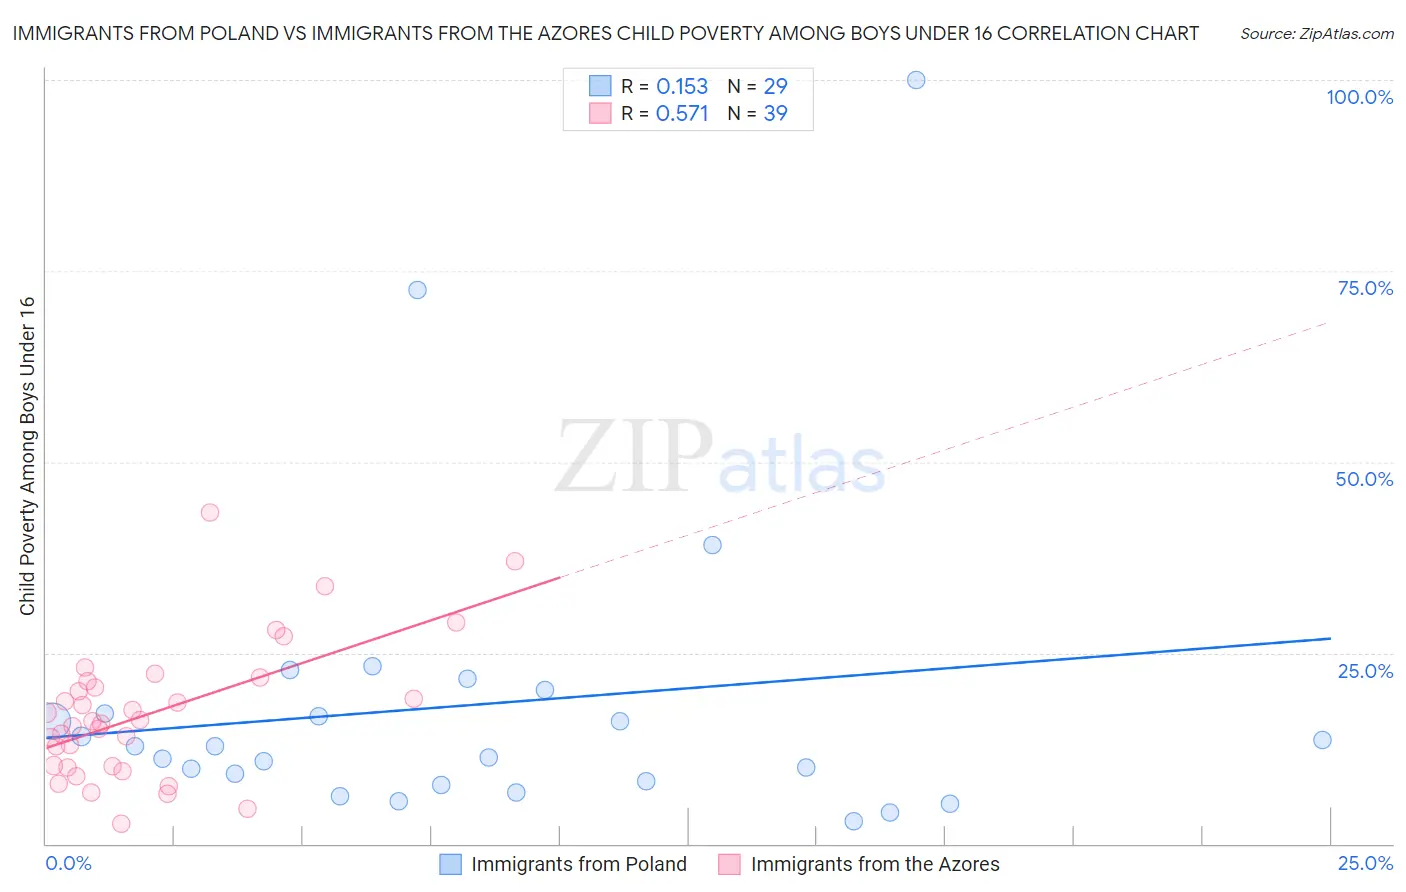 Immigrants from Poland vs Immigrants from the Azores Child Poverty Among Boys Under 16